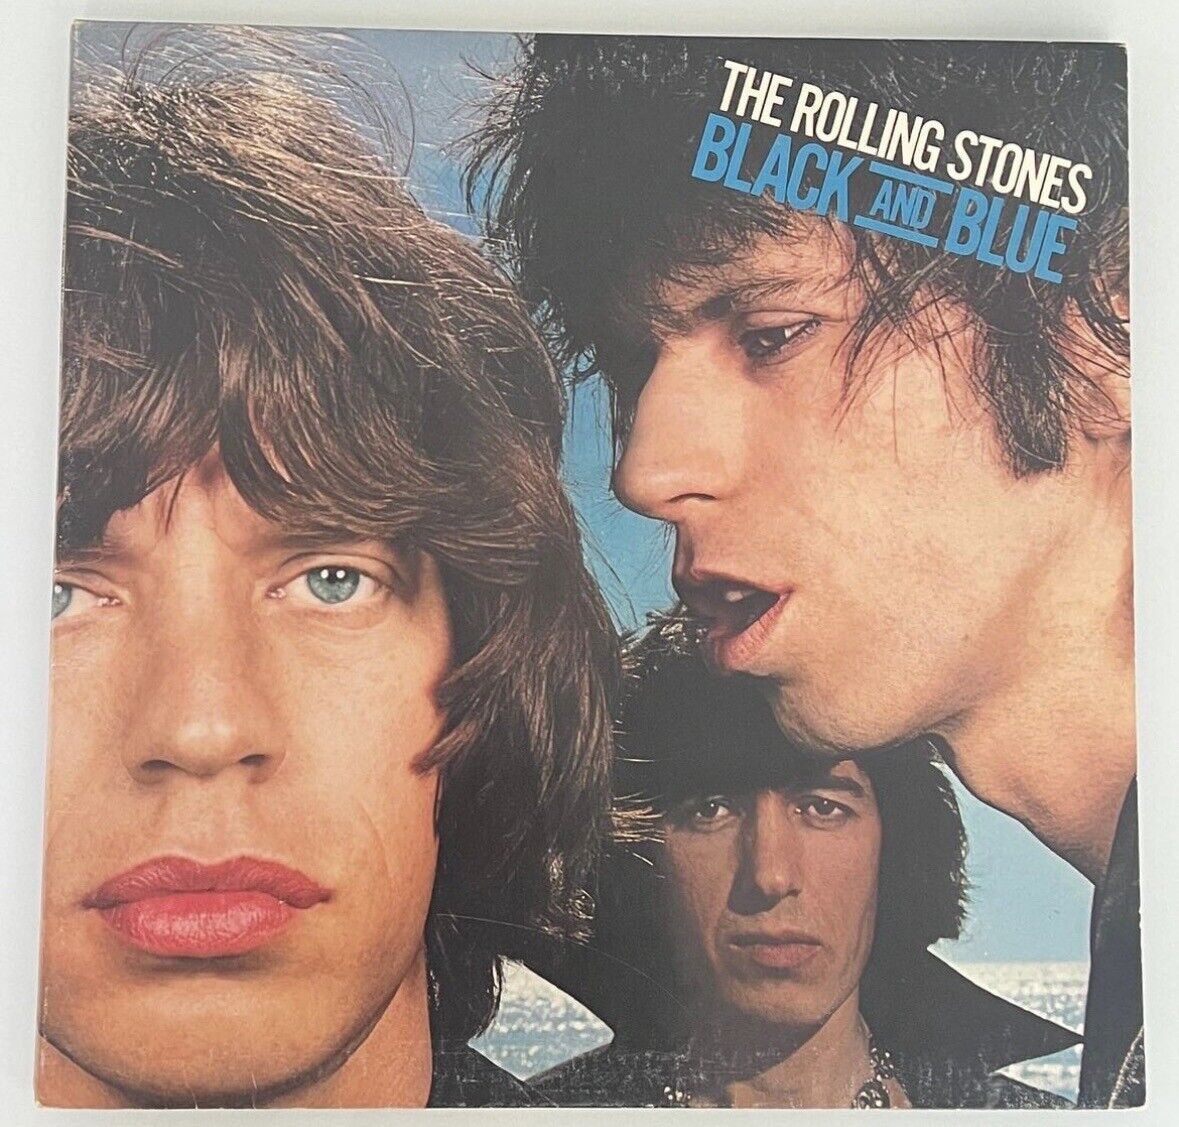 The Rolling Stones – Black And Blue Rolling Stones Records – COC 79104 / 1976